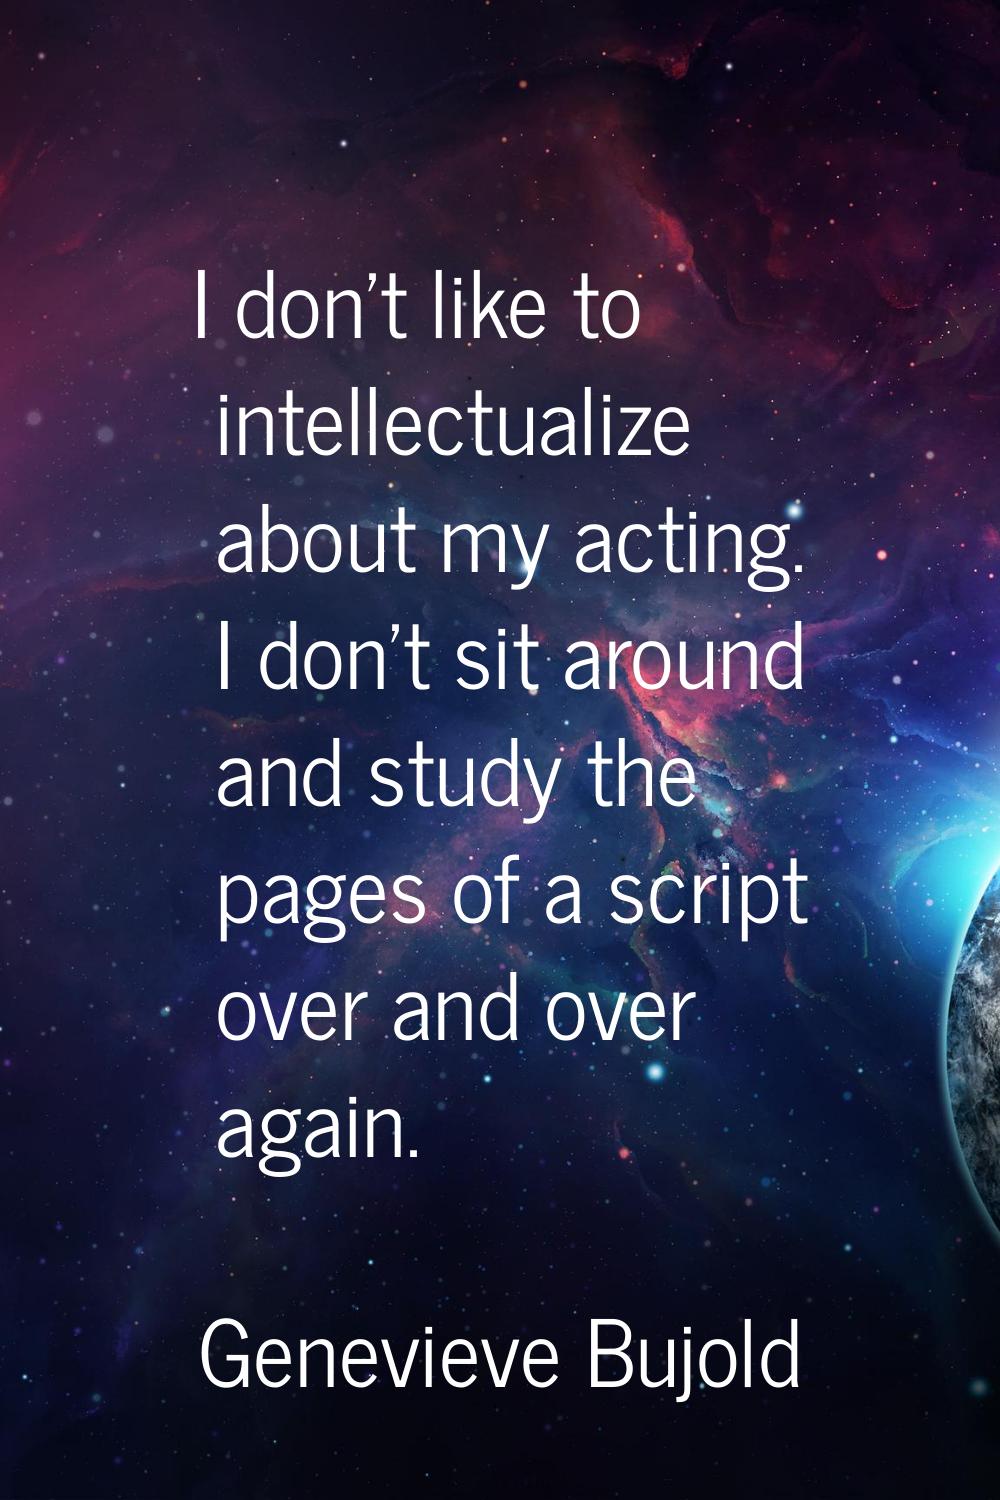 I don't like to intellectualize about my acting. I don't sit around and study the pages of a script